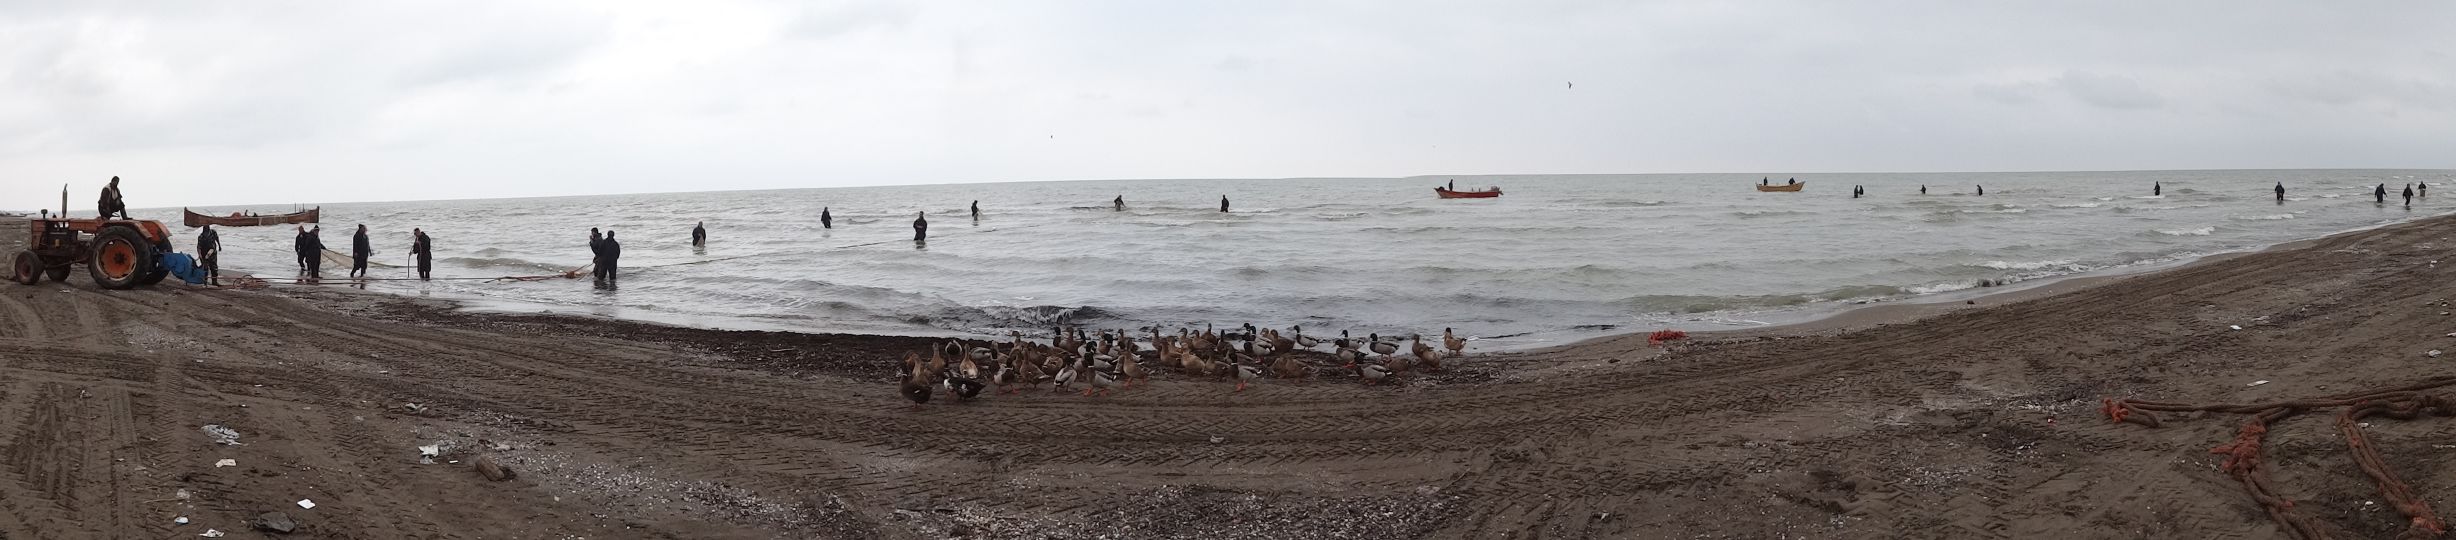 Caspian Sea - a whole team working on the catch of the day